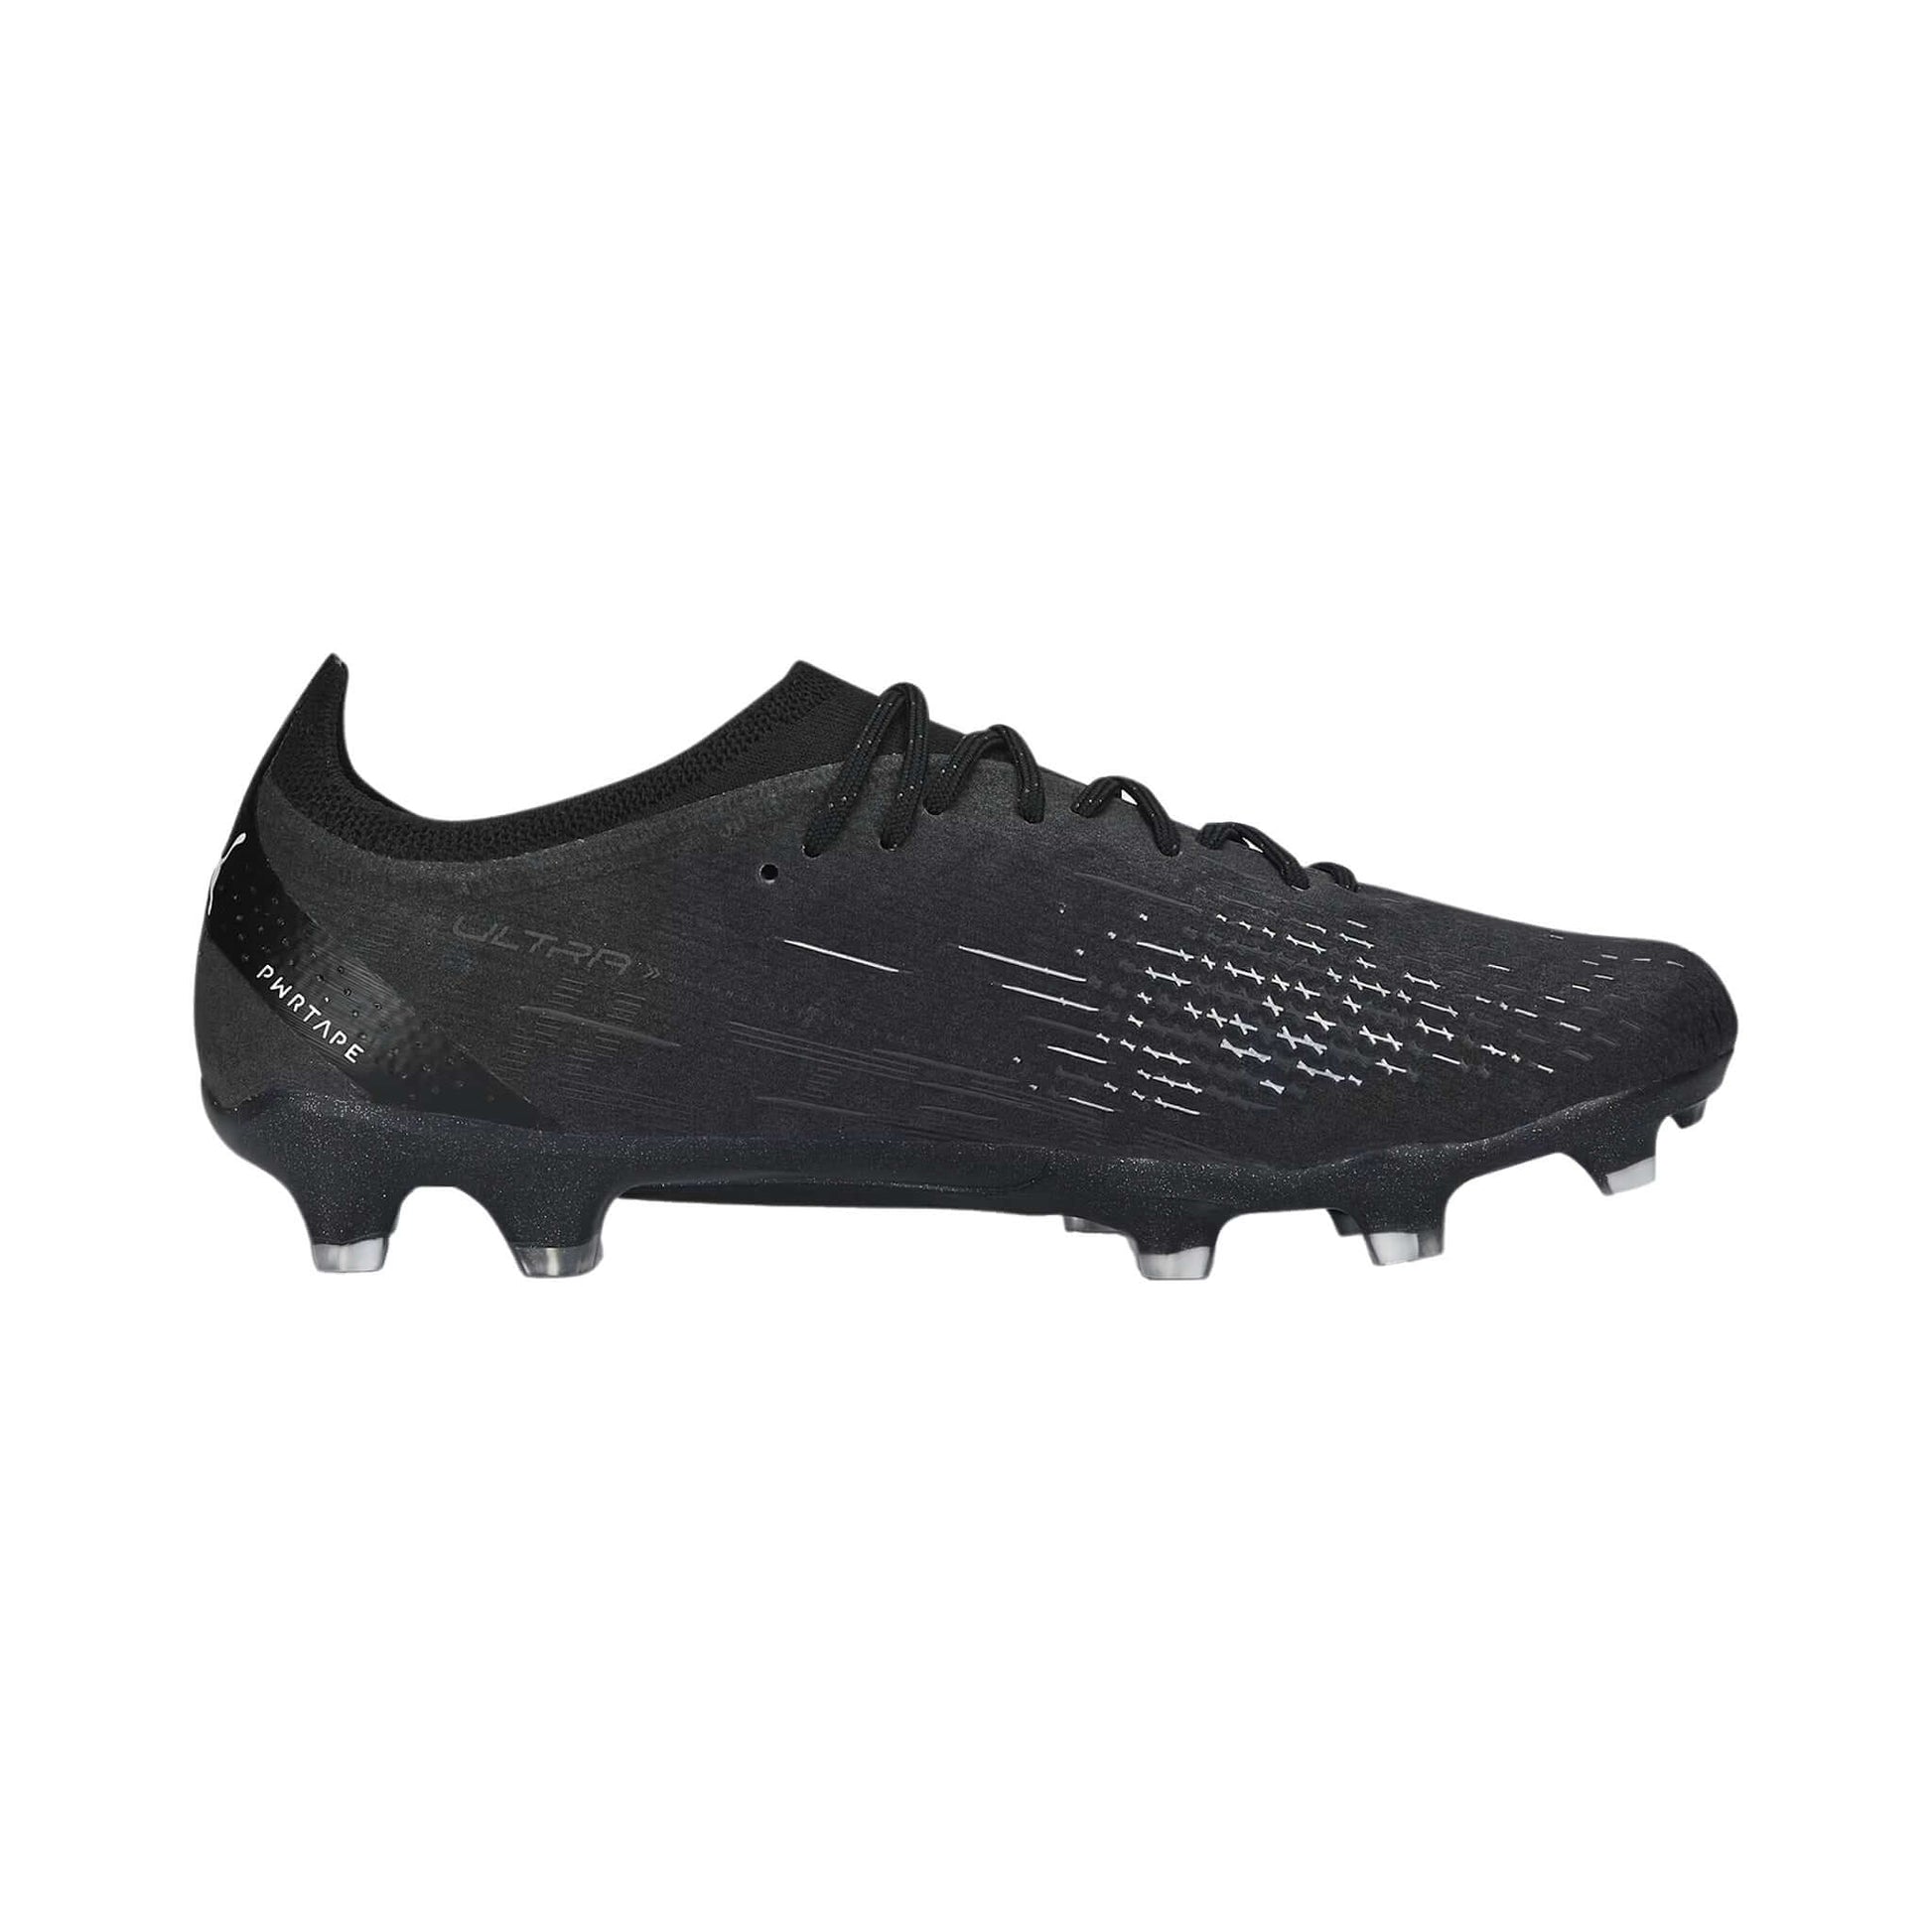 Ultra Ultimate Firm & Artificial Ground Cleats | EvangelistaSports.com | Canada's Premiere Soccer Store